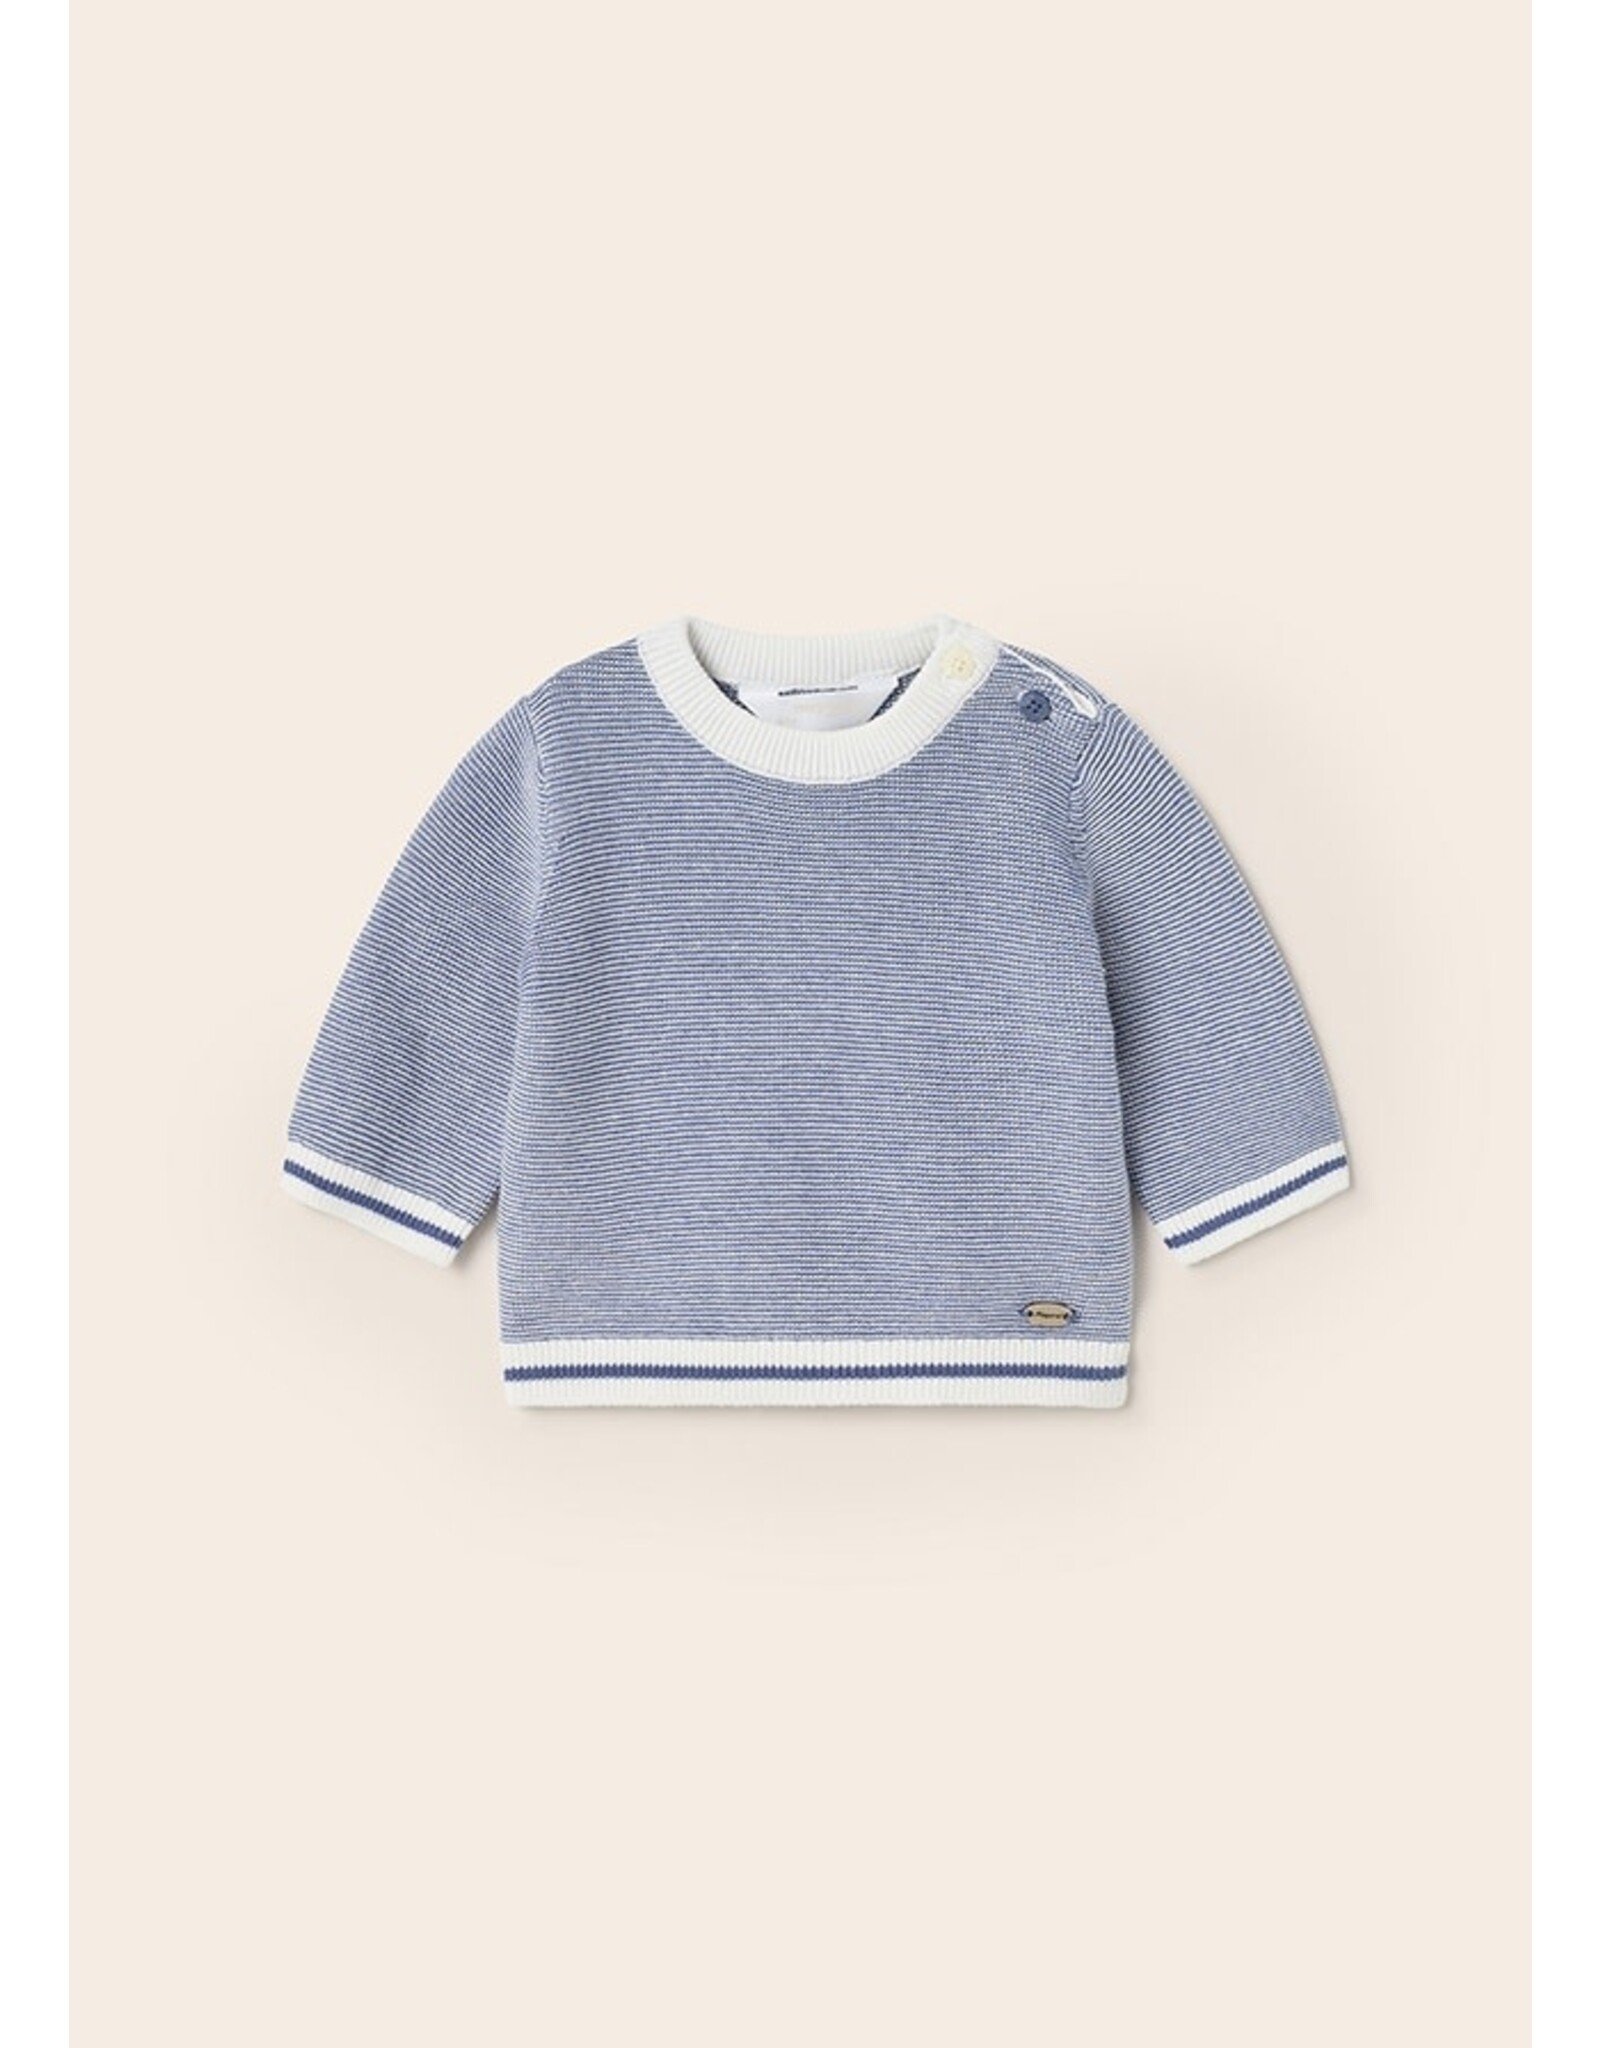 Mayoral Imperial Blue Knit Sweater with Stripe